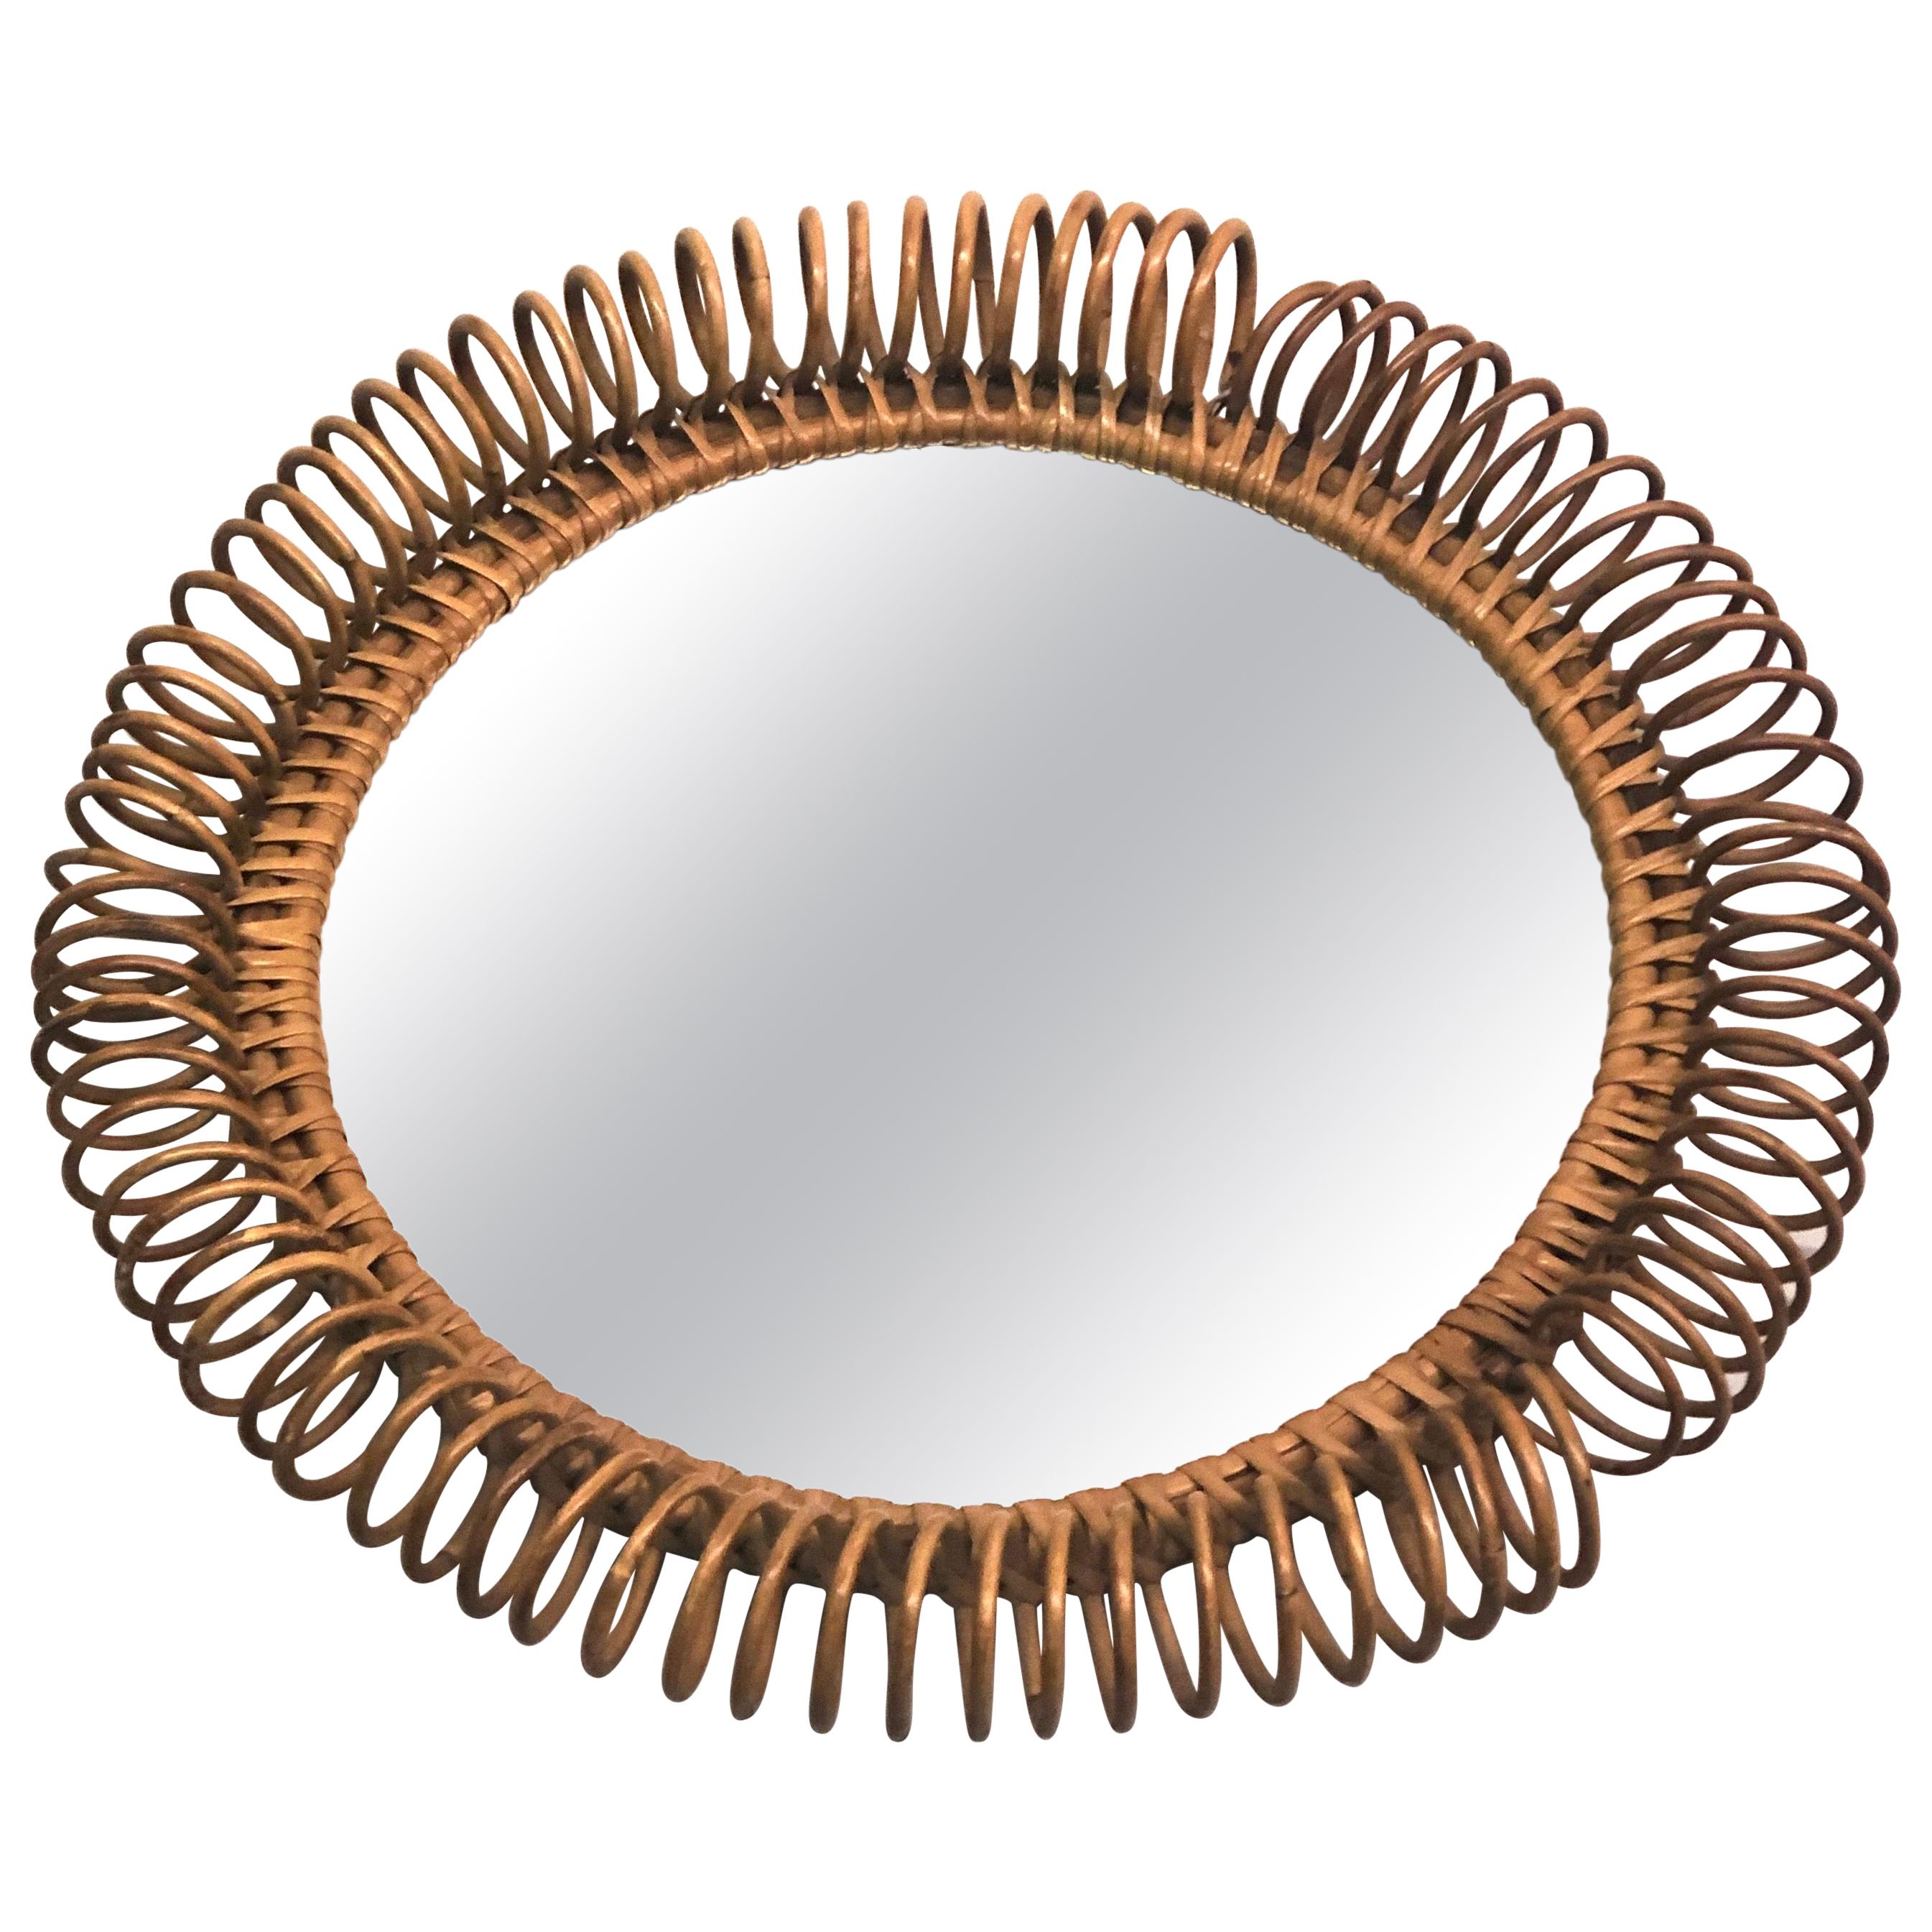 Italian Mid-Century Modern mirror in rattan attributed to Franco Albini. The mirror is round and the rattan is woven as an elegant, poetic spiral which delicately circles the frame. 

References: Jean Royère, Sunburst Mirrors, Bamboo, Wicker.